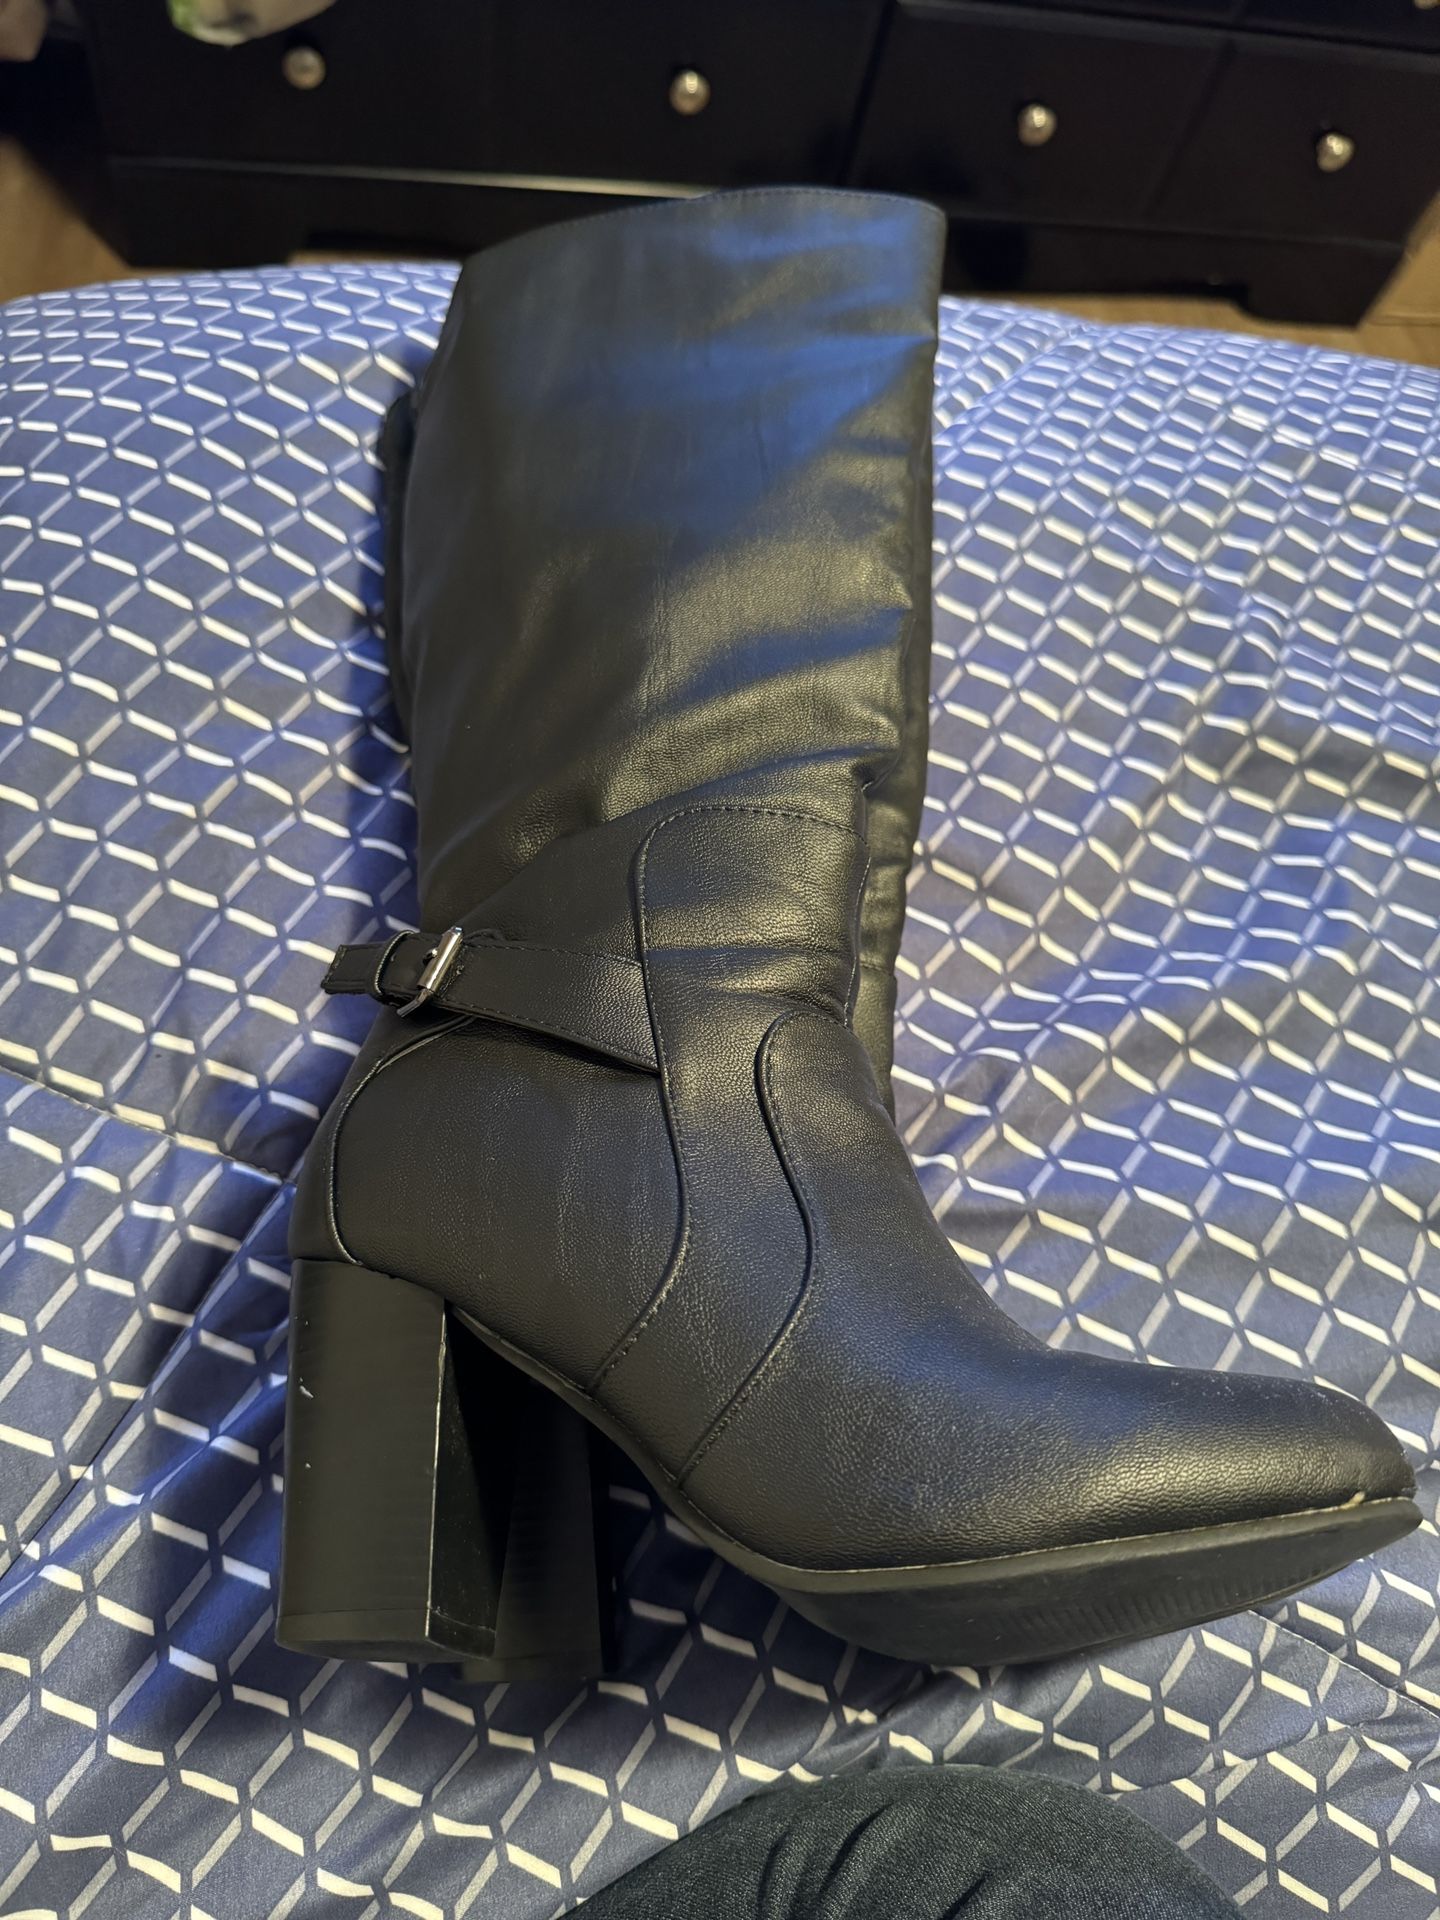 Excellent Like New Condition Women’s Size 7 Black Boots 